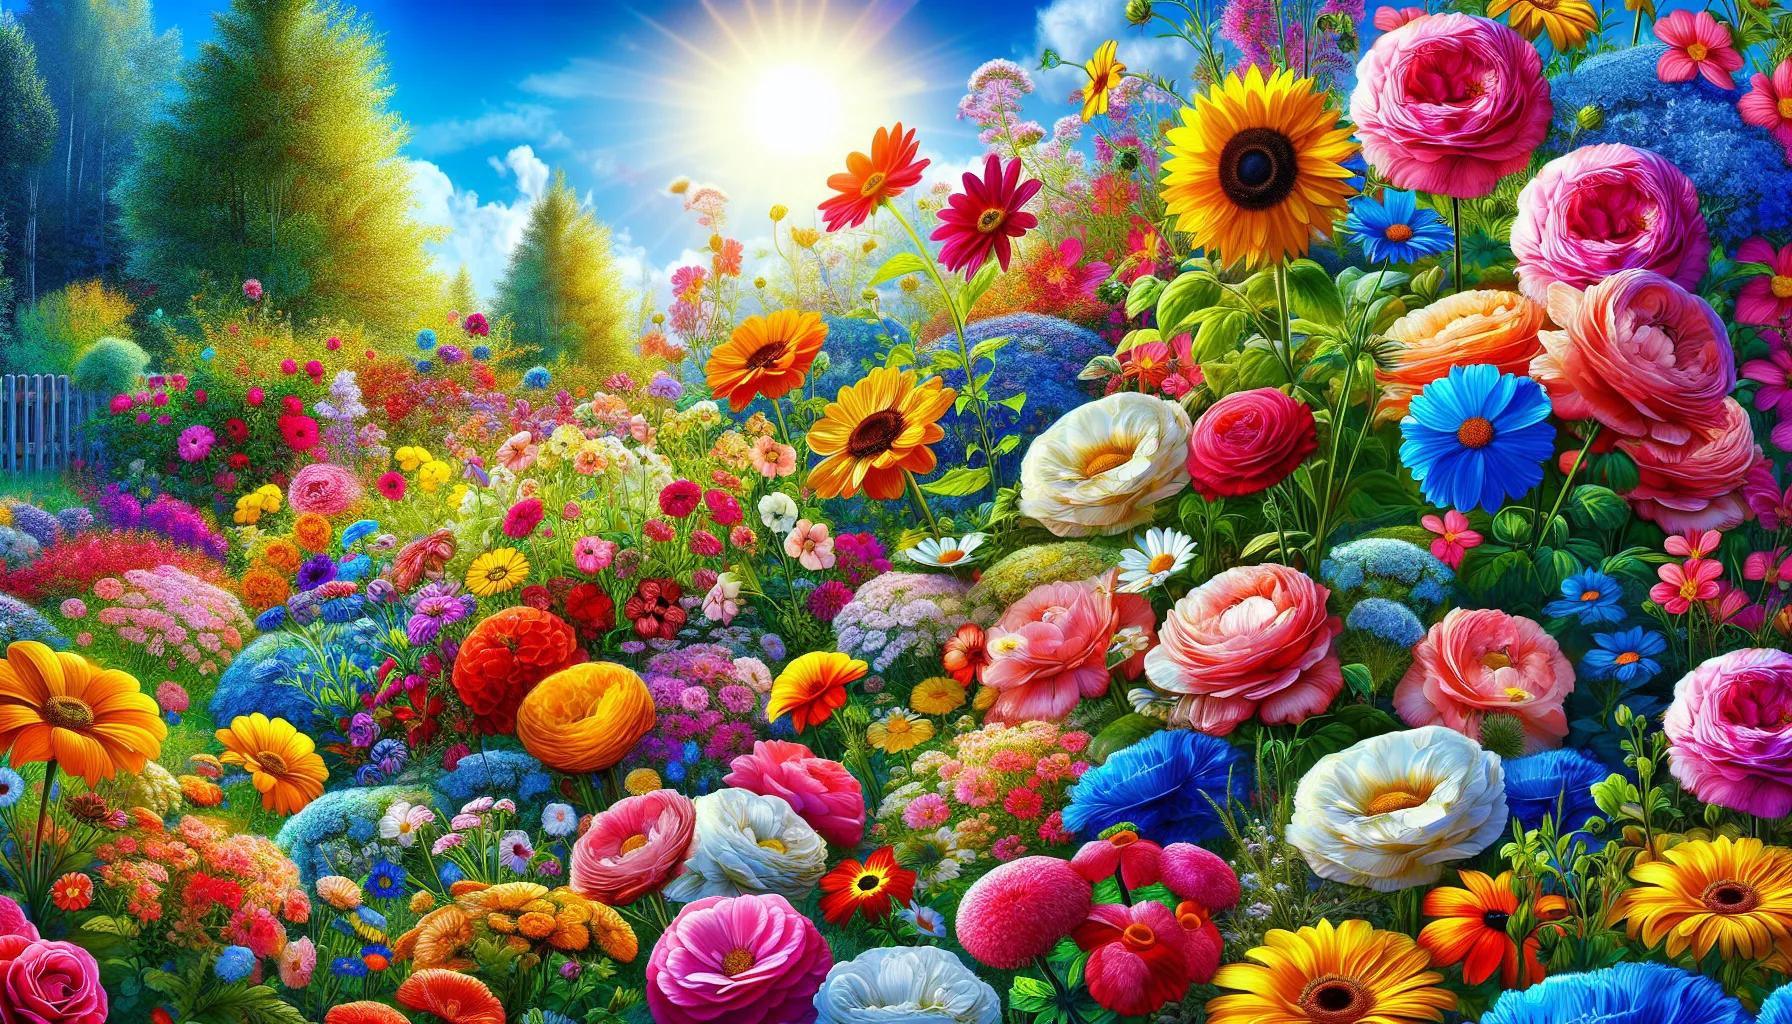 A vibrant and colorful display of assorted yard flowers in full bloom under a bright sunny sky.